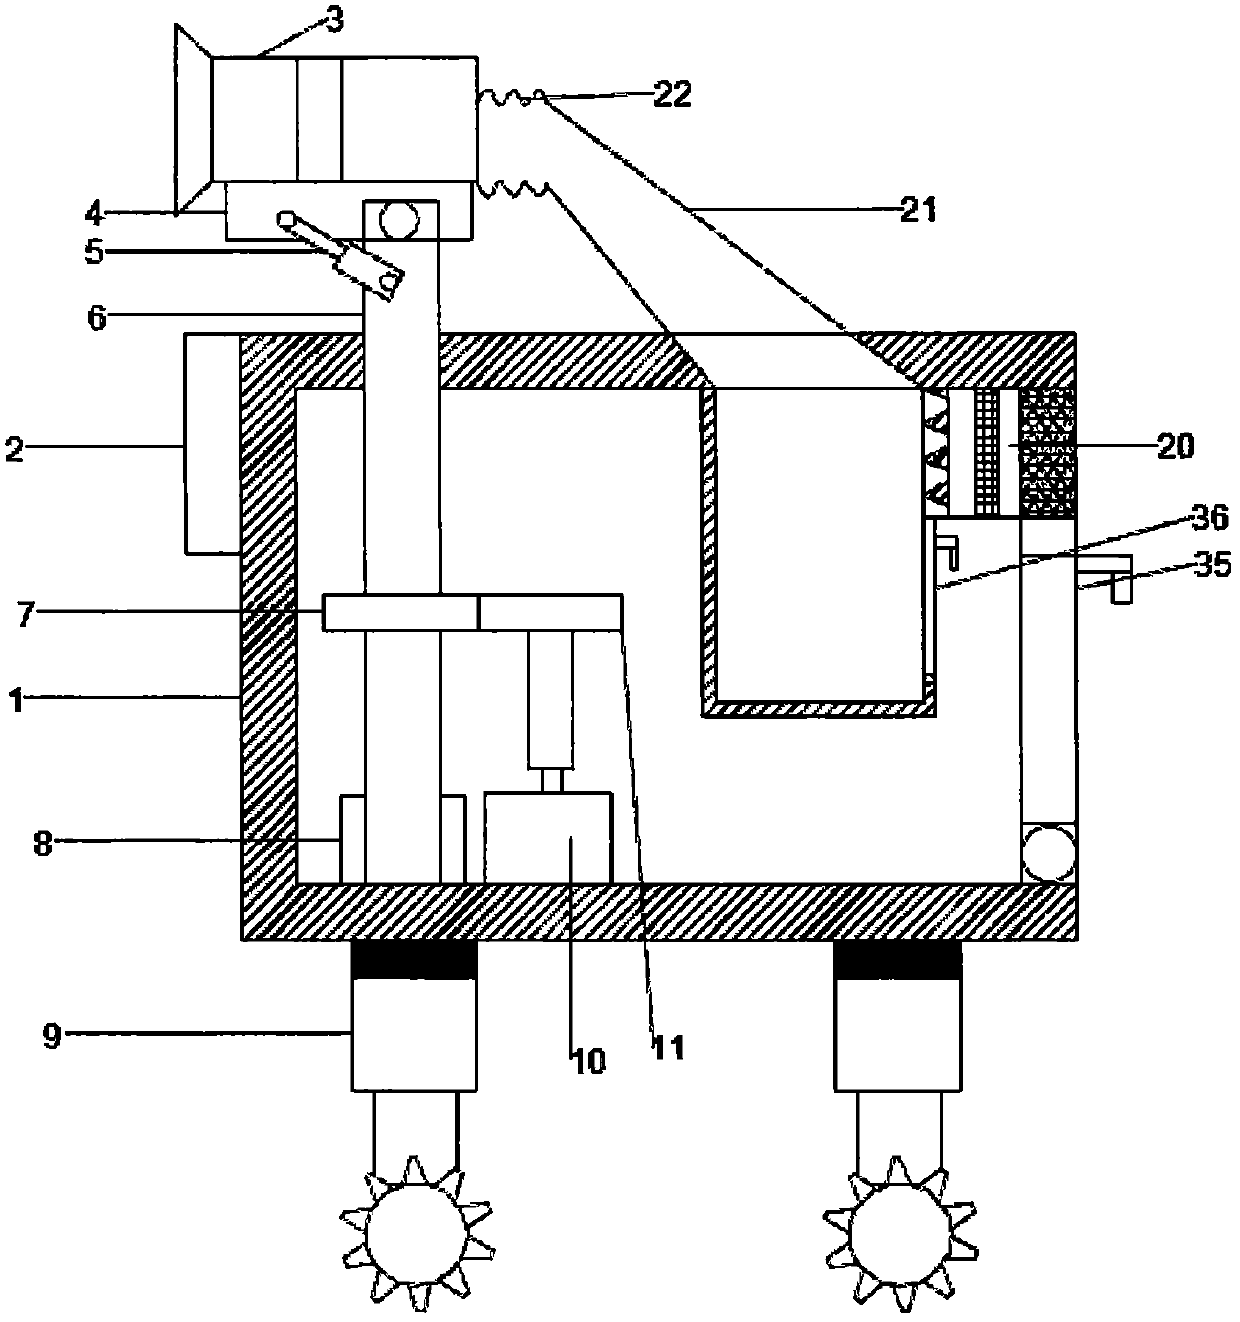 Ventilation device suitable for complex environment and used for removing dust